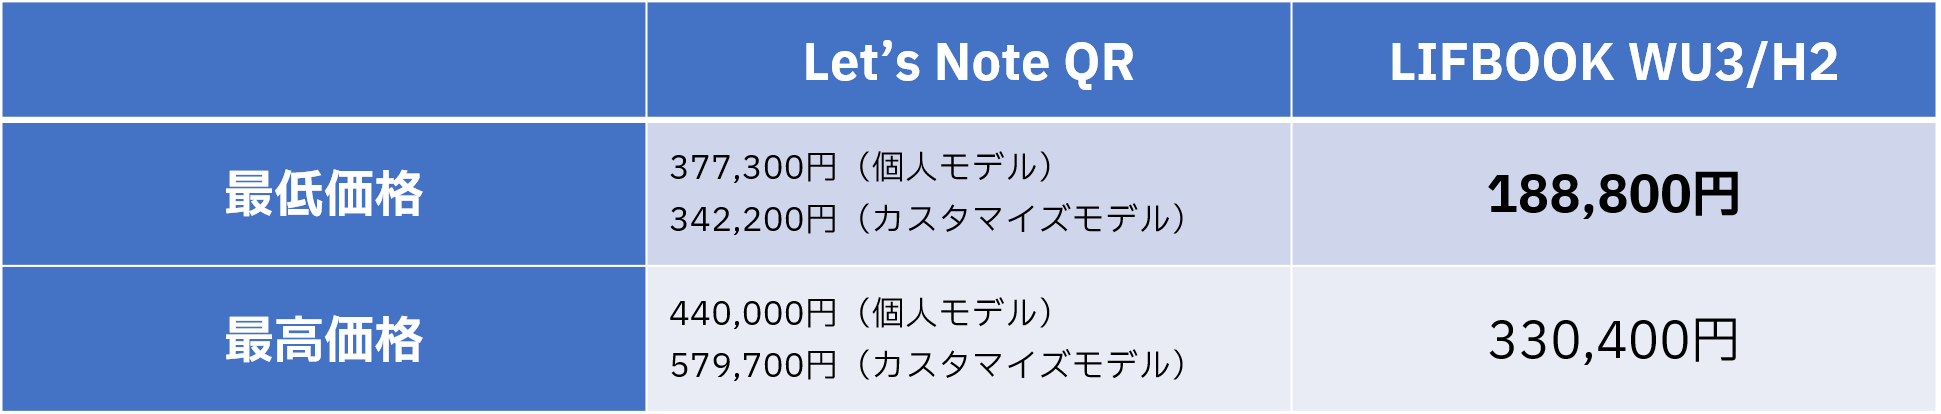 Let's Note QRとLIFEBOOK WU3/H2の本体価格